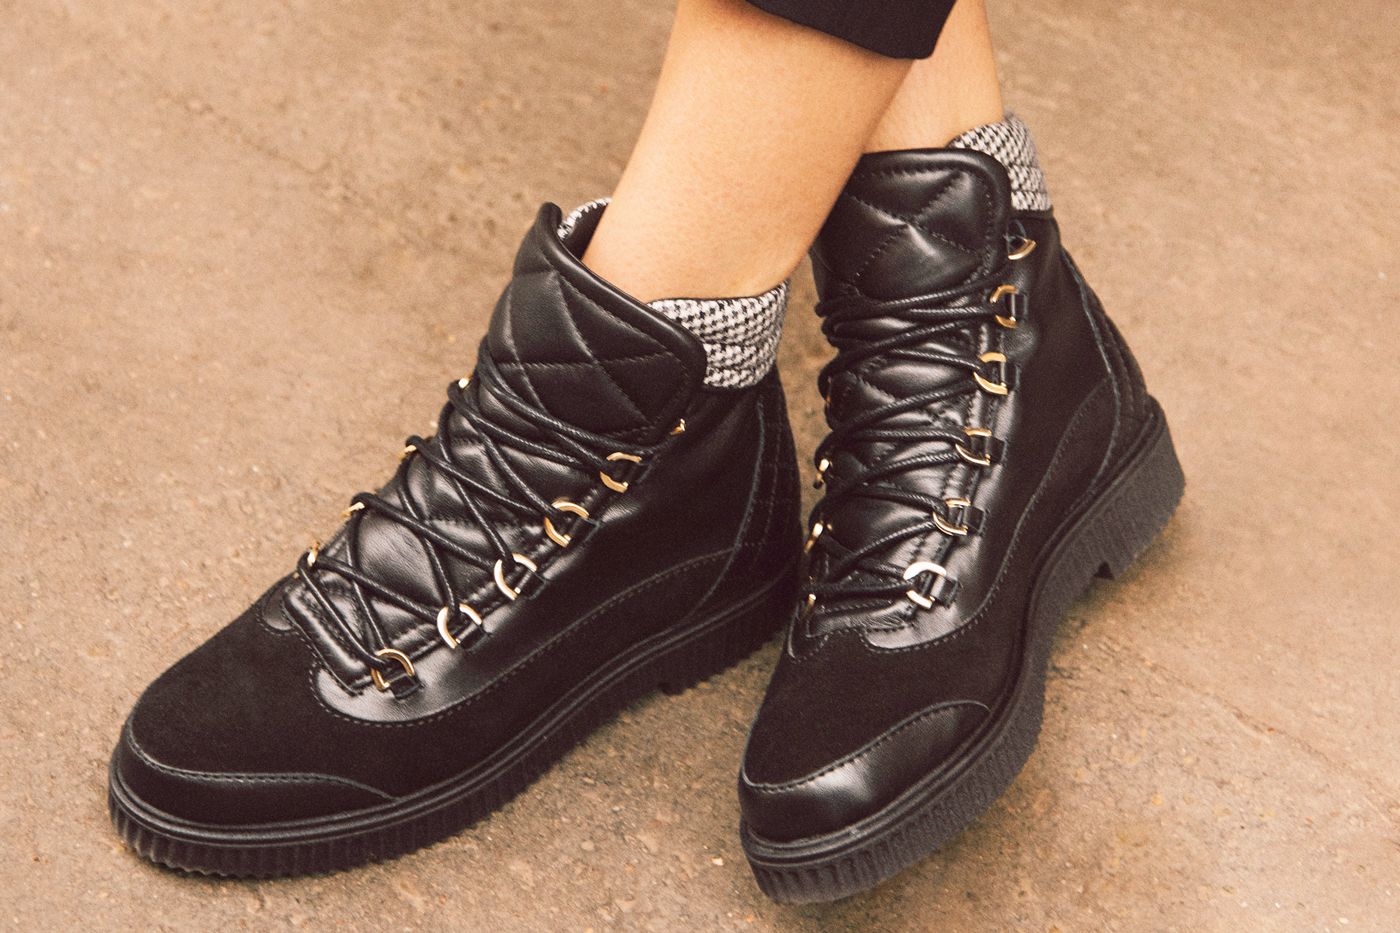 13 stylish hiking boots to buy before 